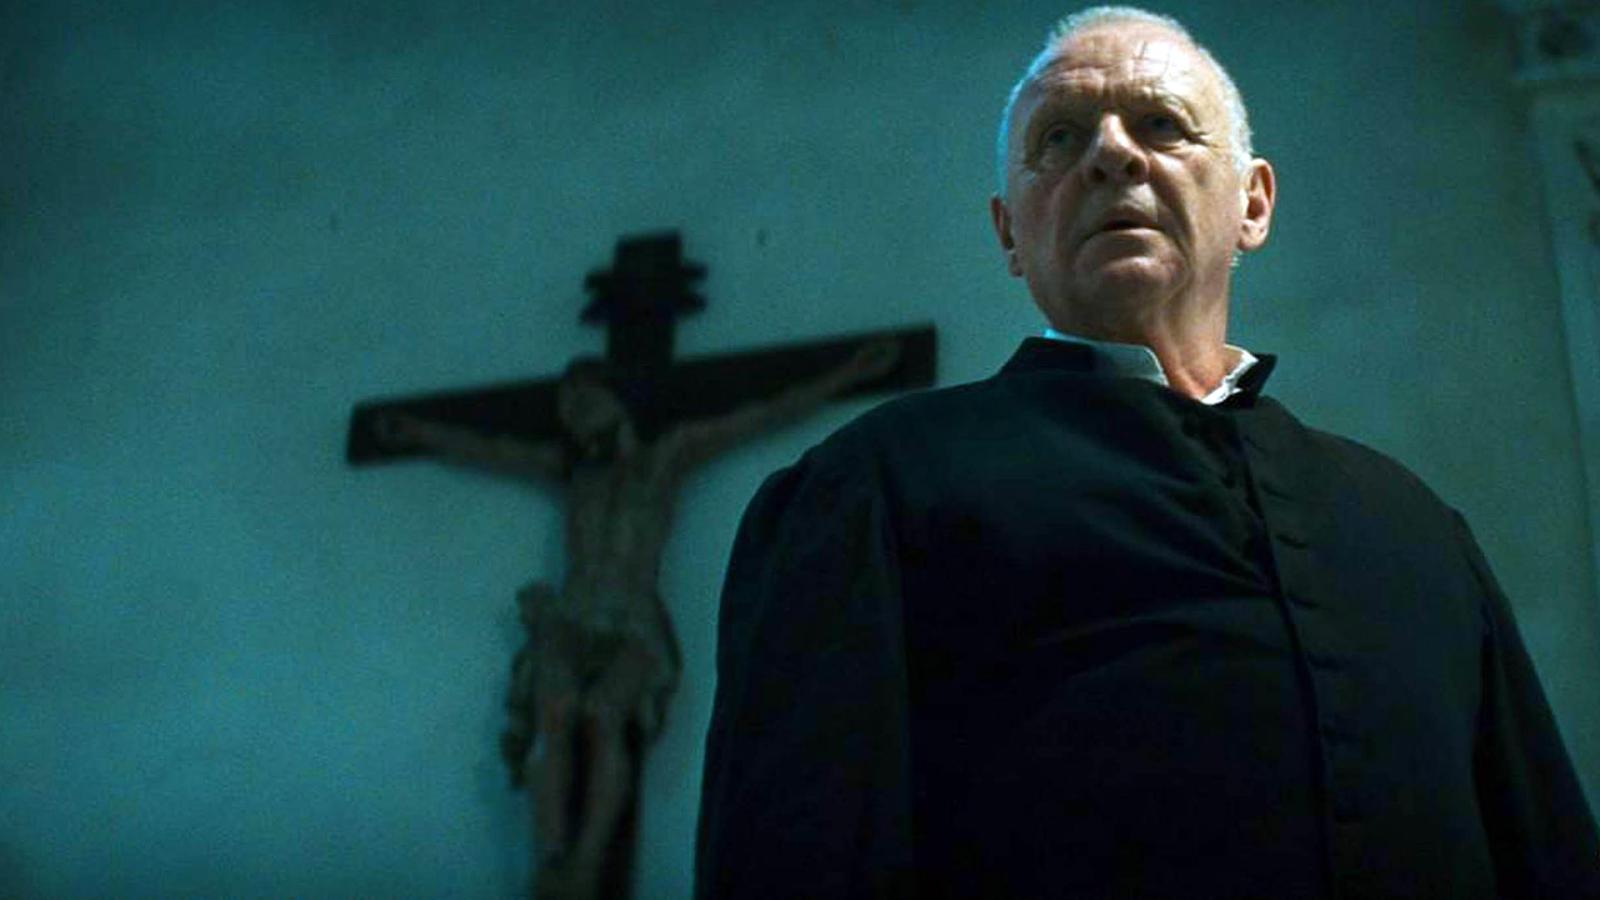 15 Movies About Exorcism That Are Highly Rewatchable (And No, The Exorcist is Not on the List) - image 2